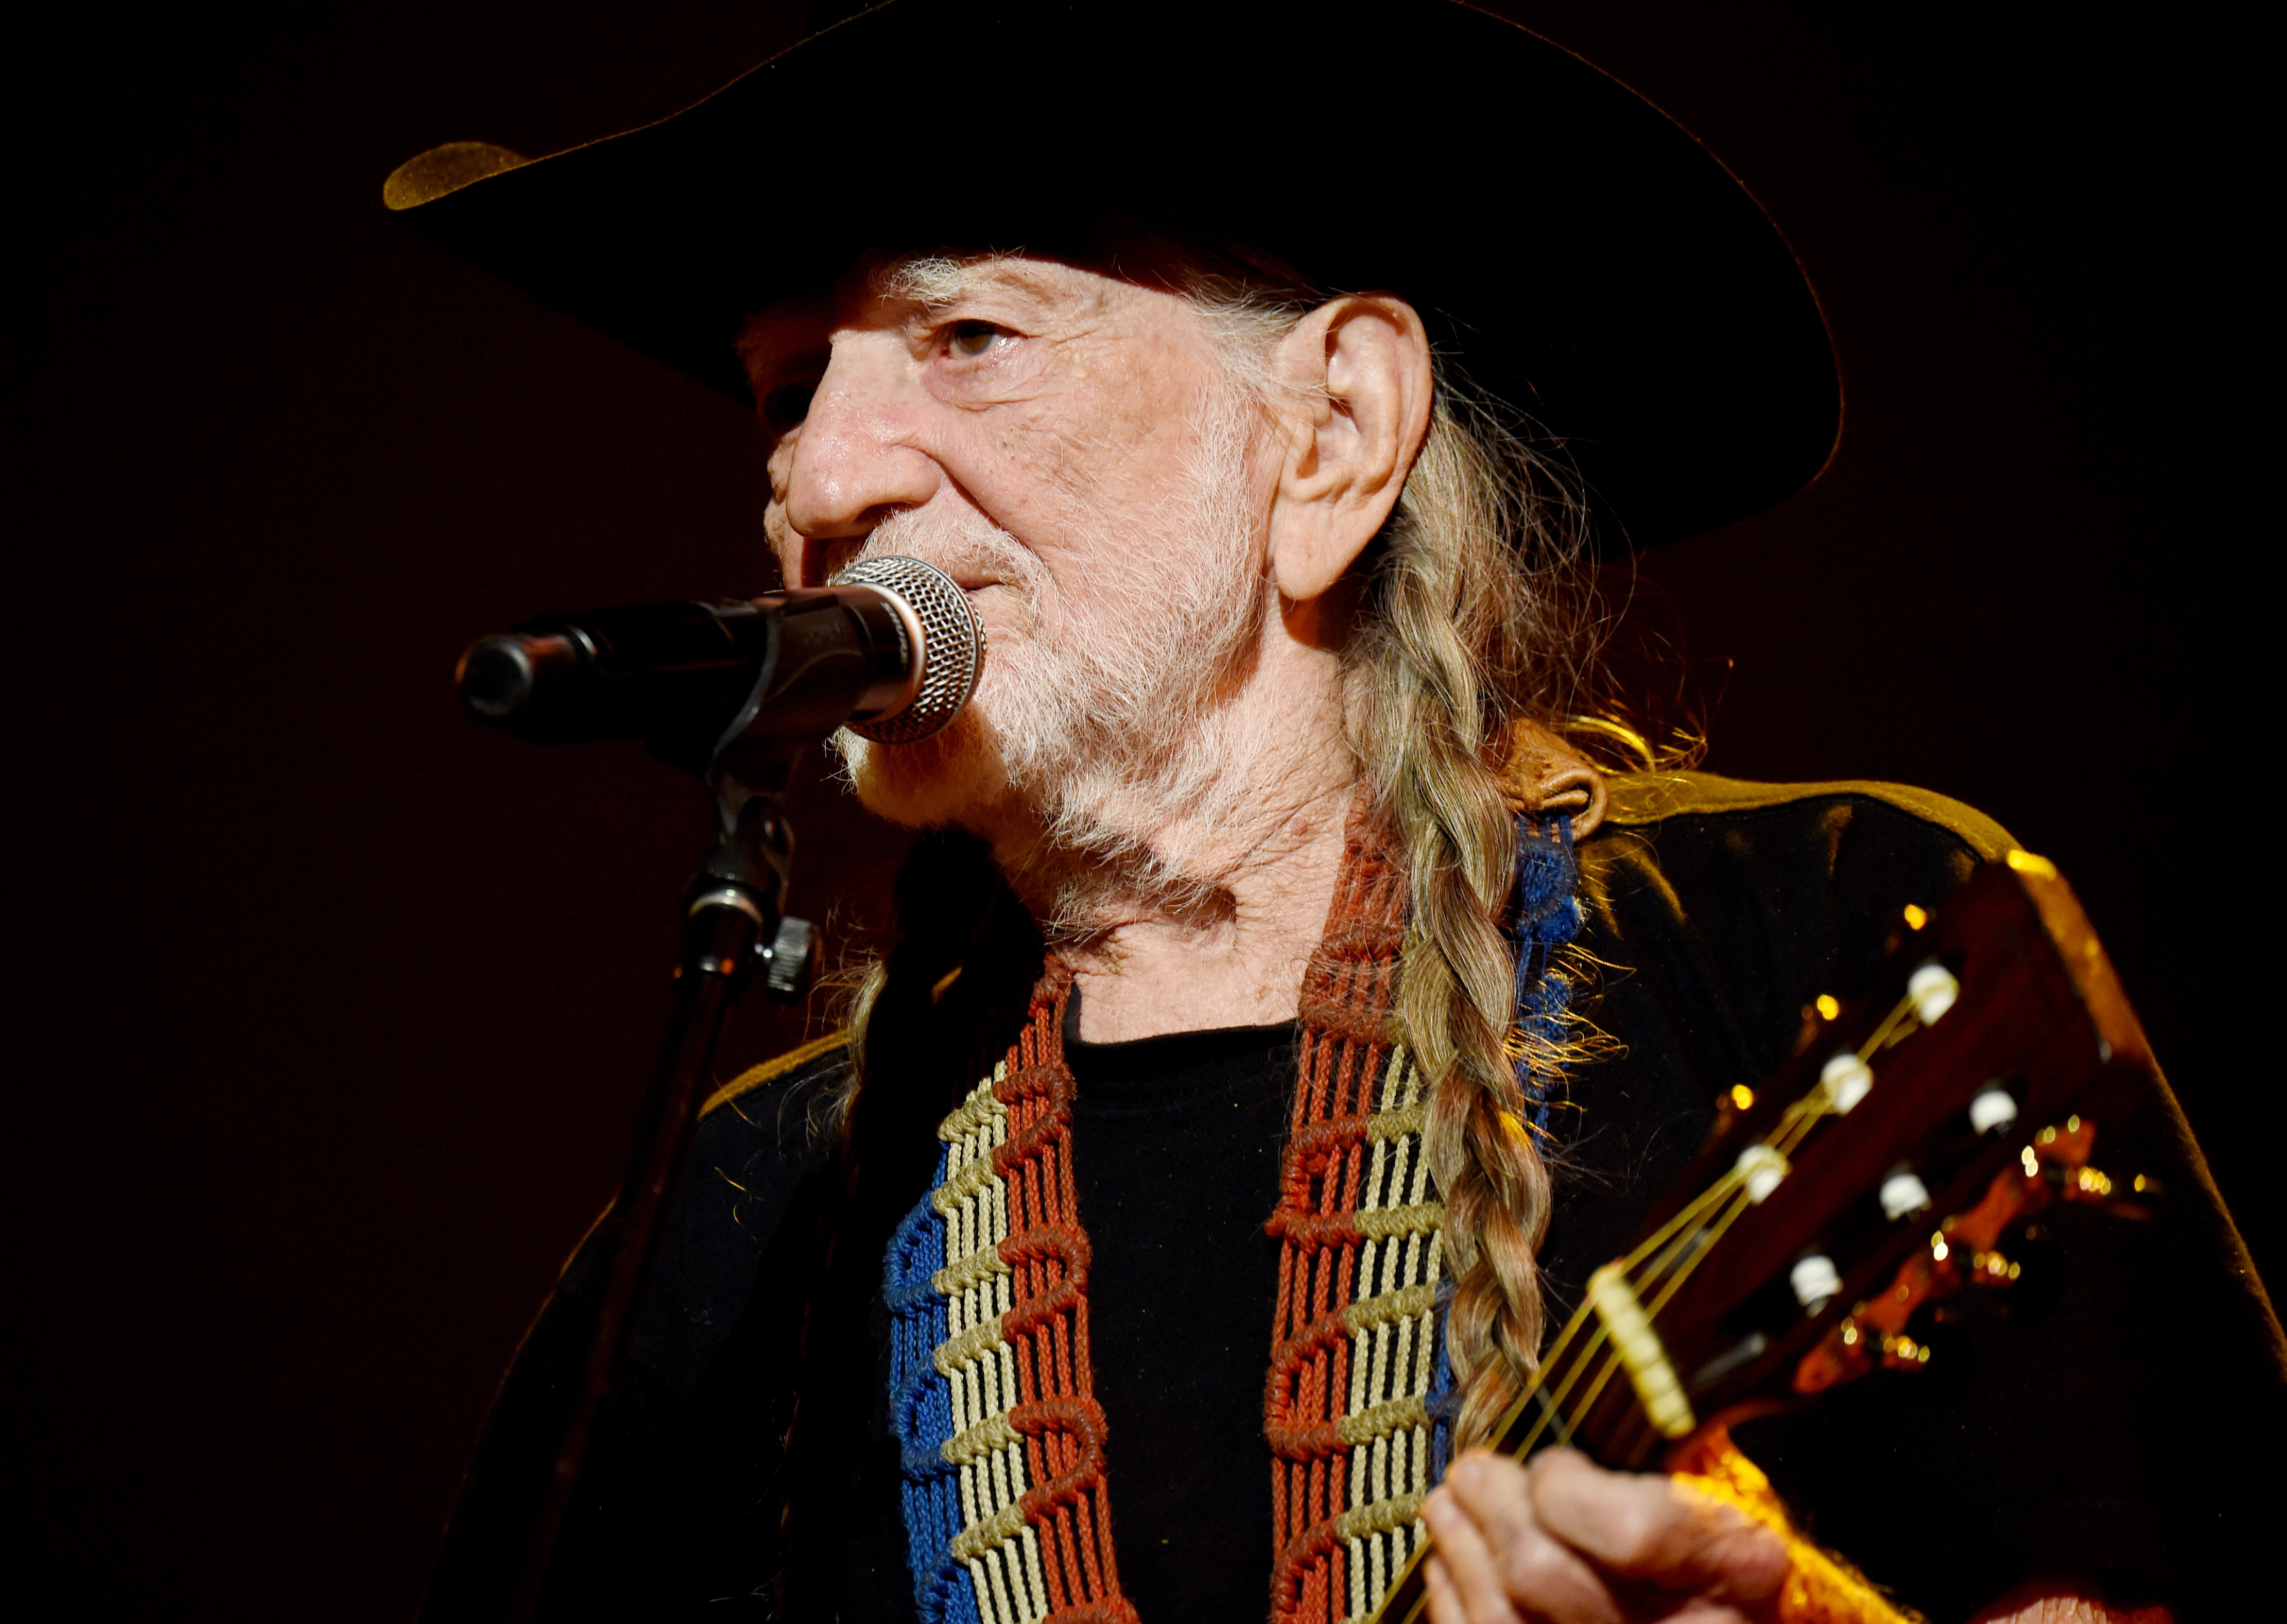 Willie Nelson at the Los Angeles Convention Center on February 6, 2015, in Los Angeles, California. | Source: Getty Images